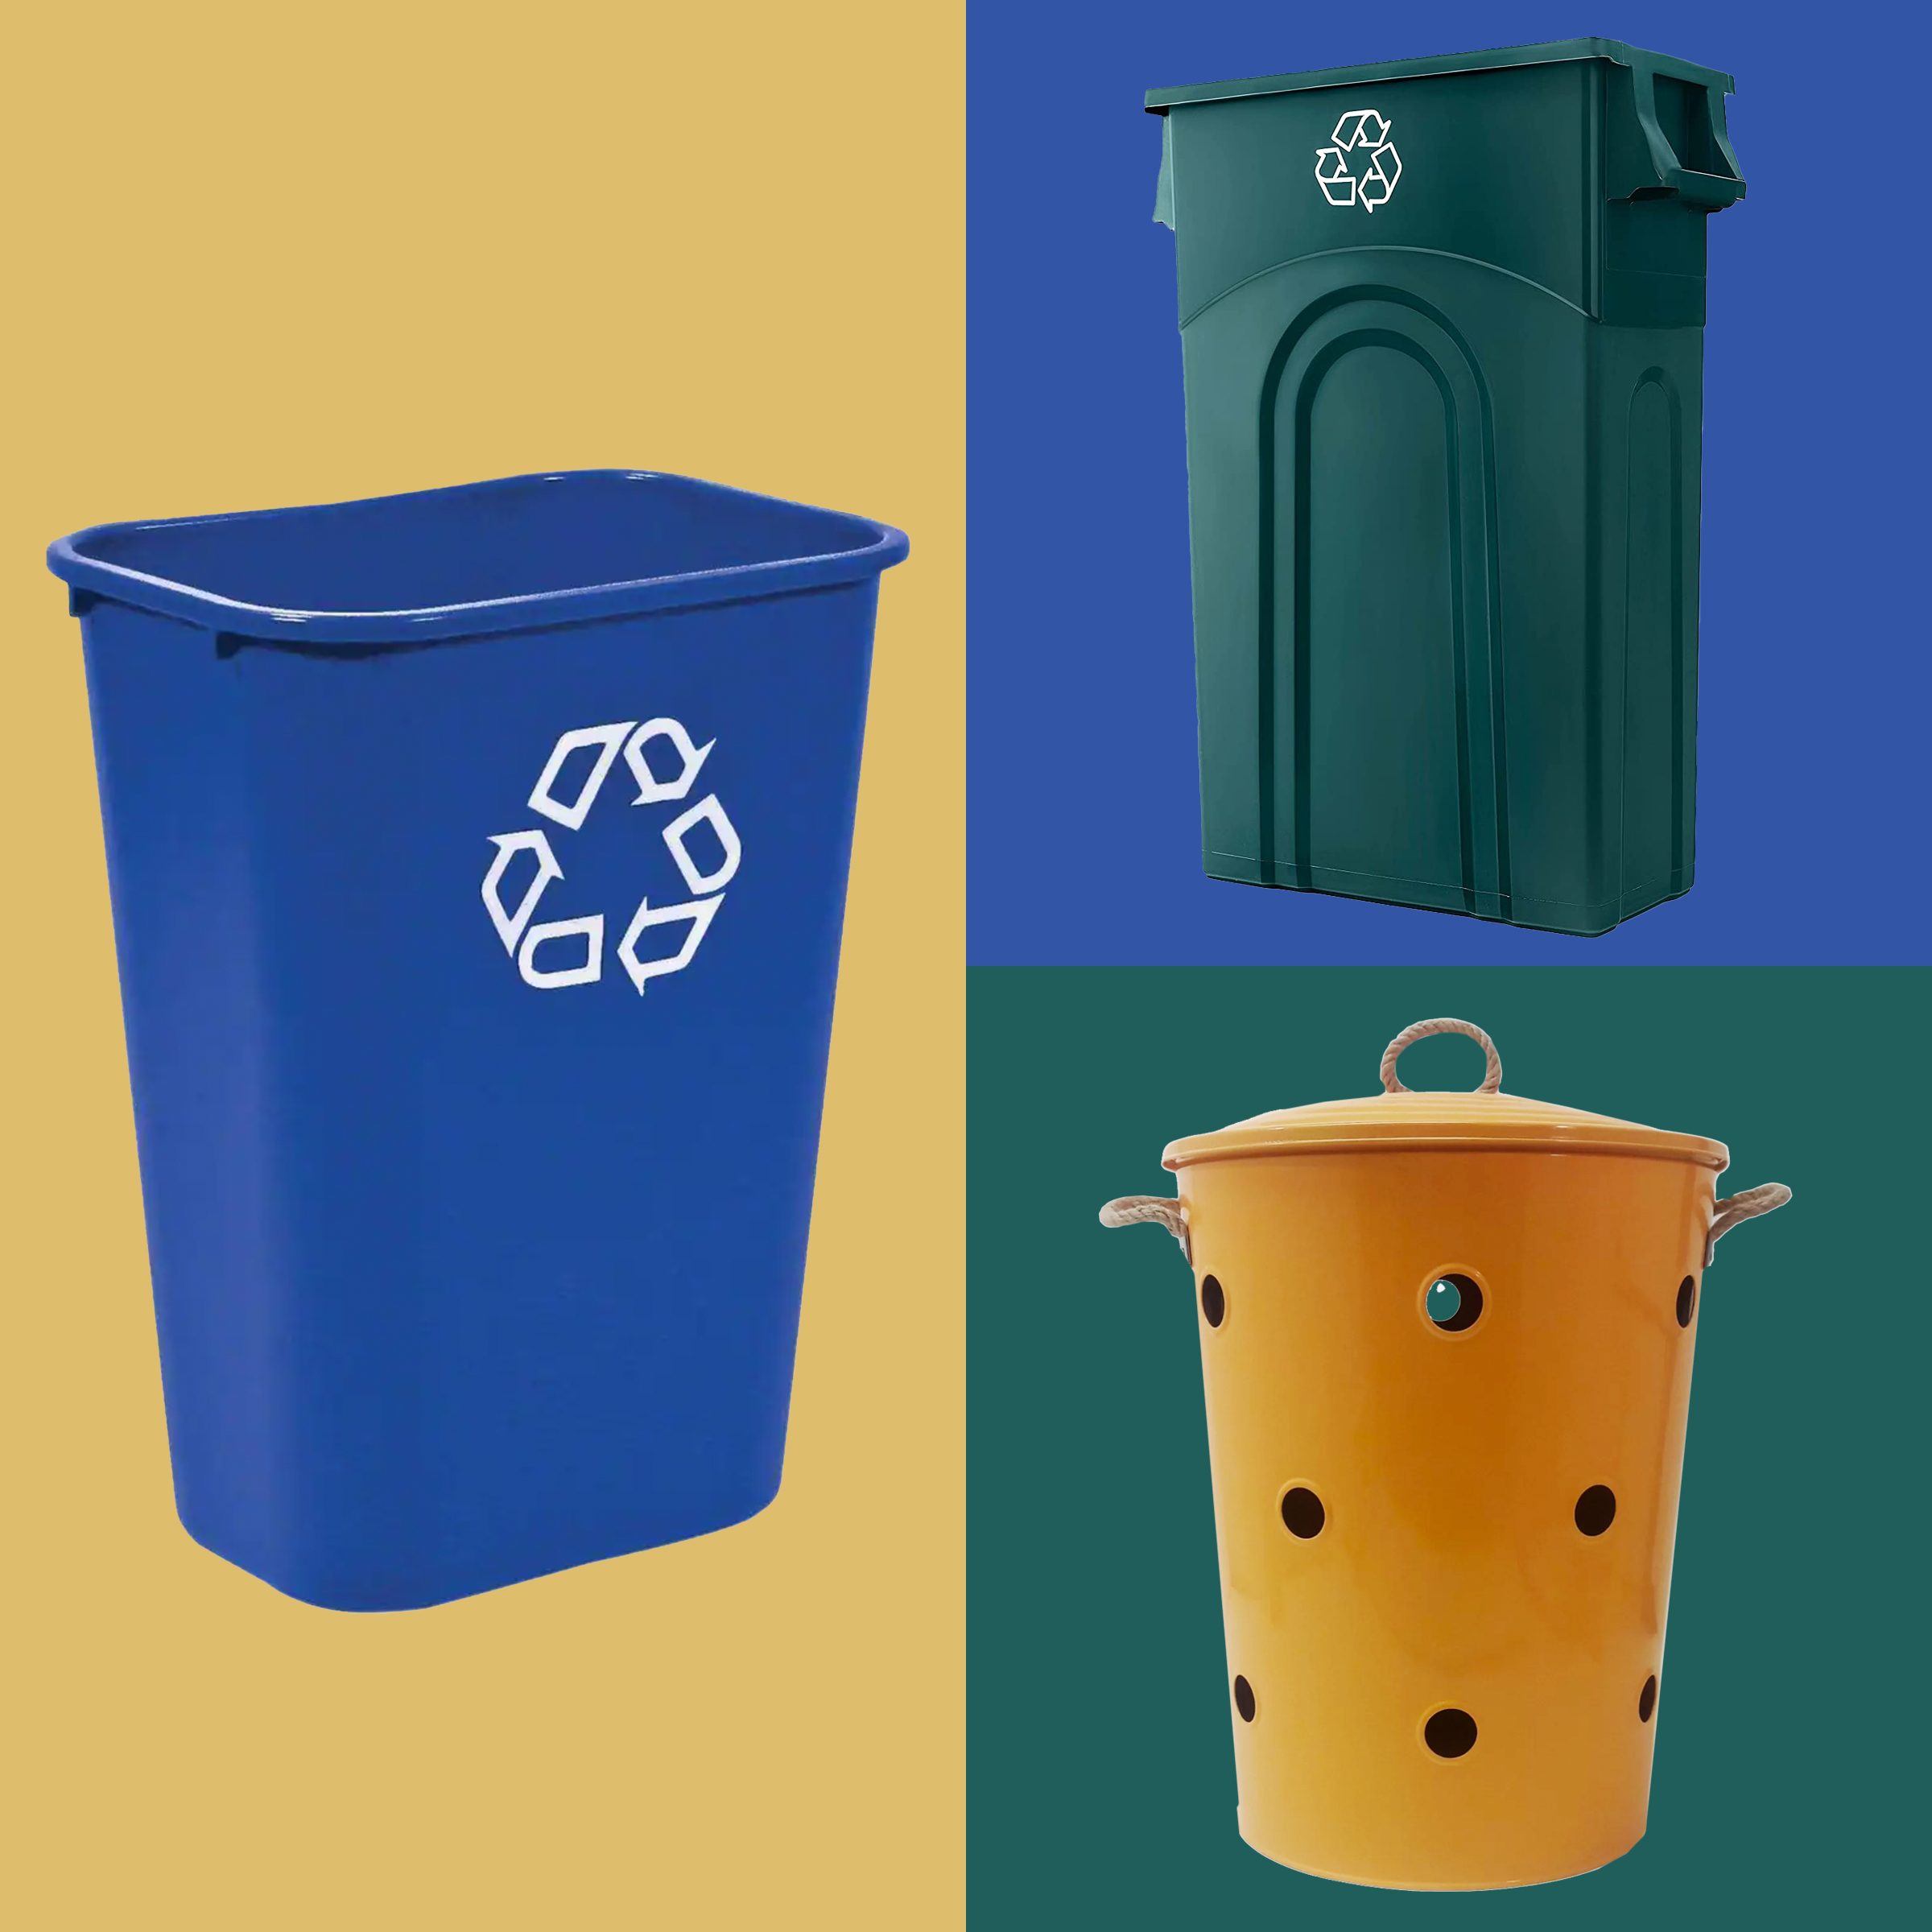 https://www.rd.com/wp-content/uploads/2022/07/recycling-bin-feature-collage.jpg?fit=700%2C700